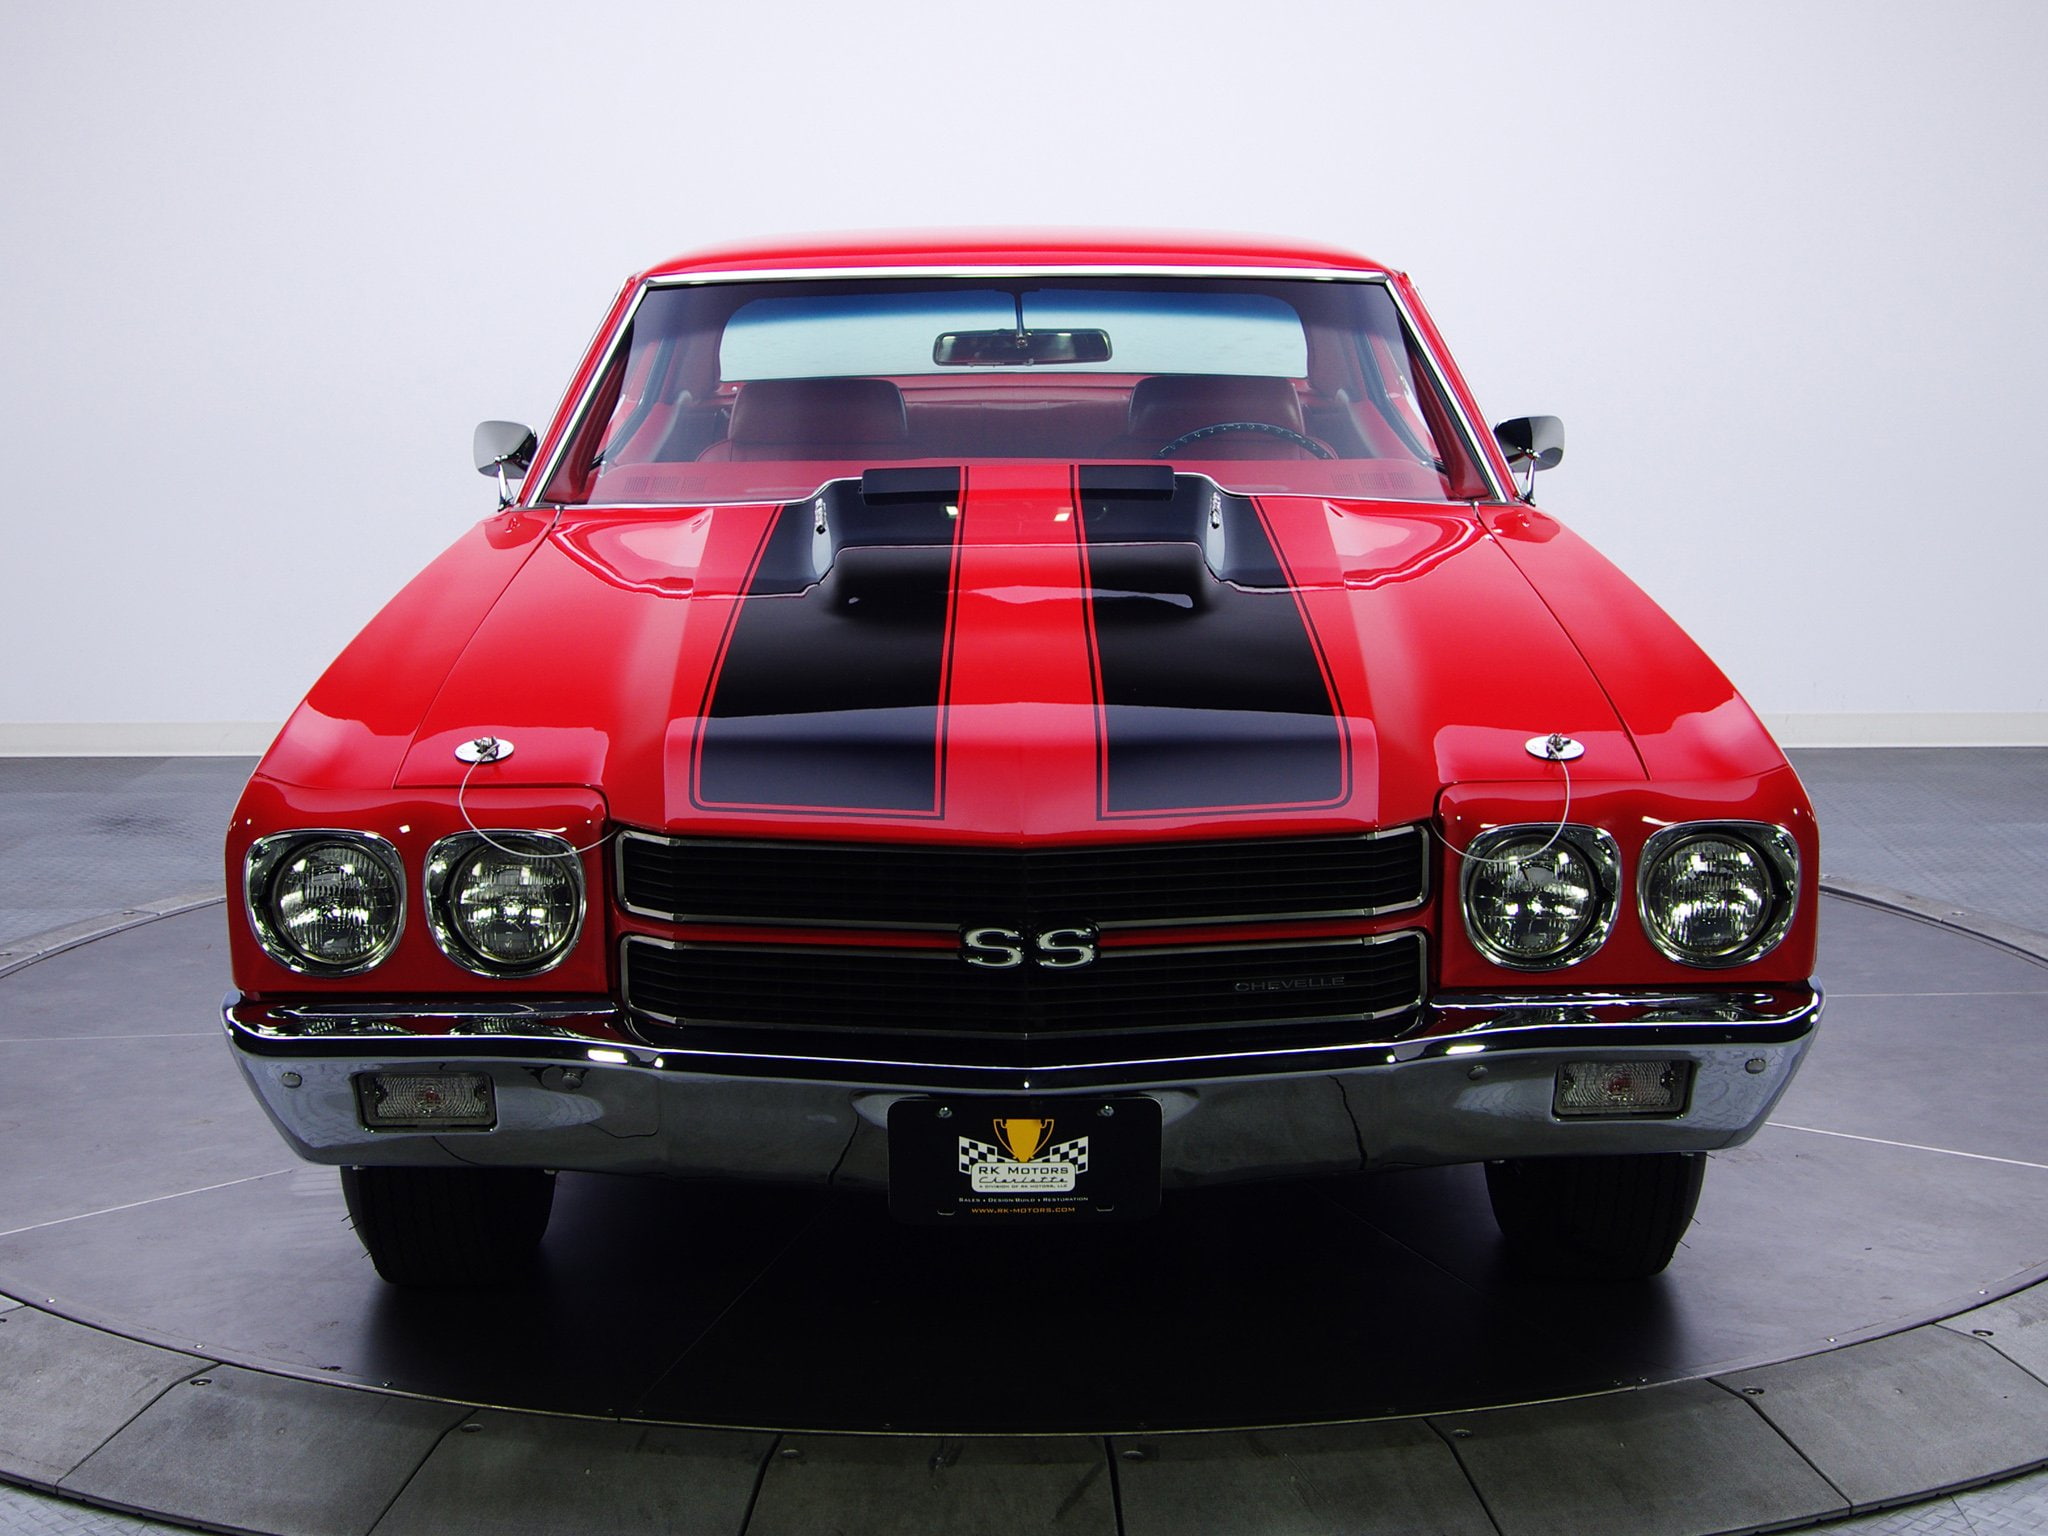 1970, 396, chevelle, chevrolet, classic, coupe, hardtop, muscle